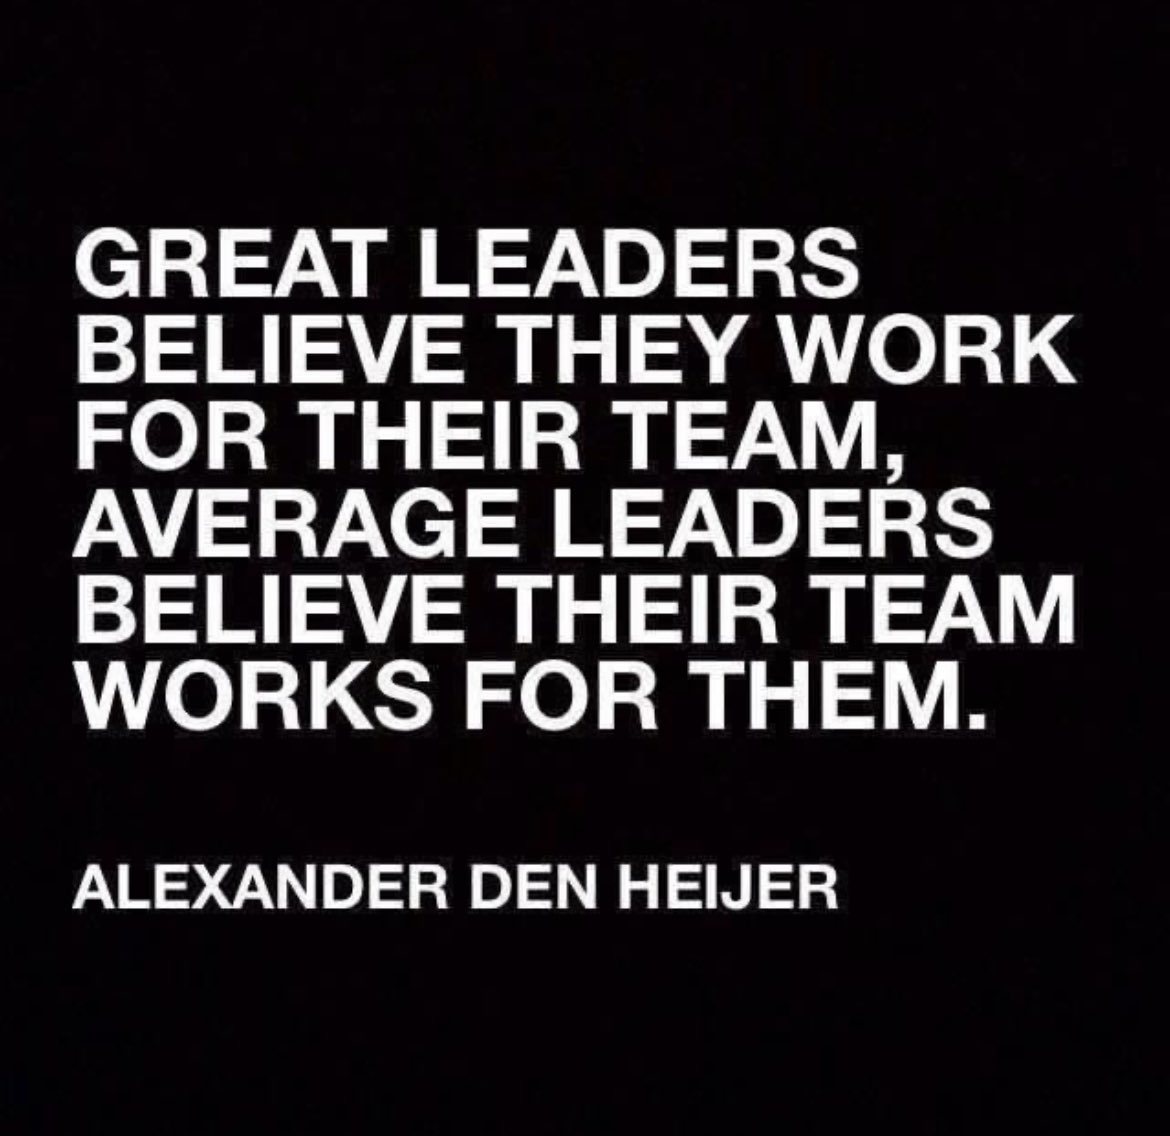 As we watch coaches and teams this weekend, let’s remember this basic truth about great leaders: we work for our teams, not the other way around. #LeadingTeams #GreatLeaders #LACOE